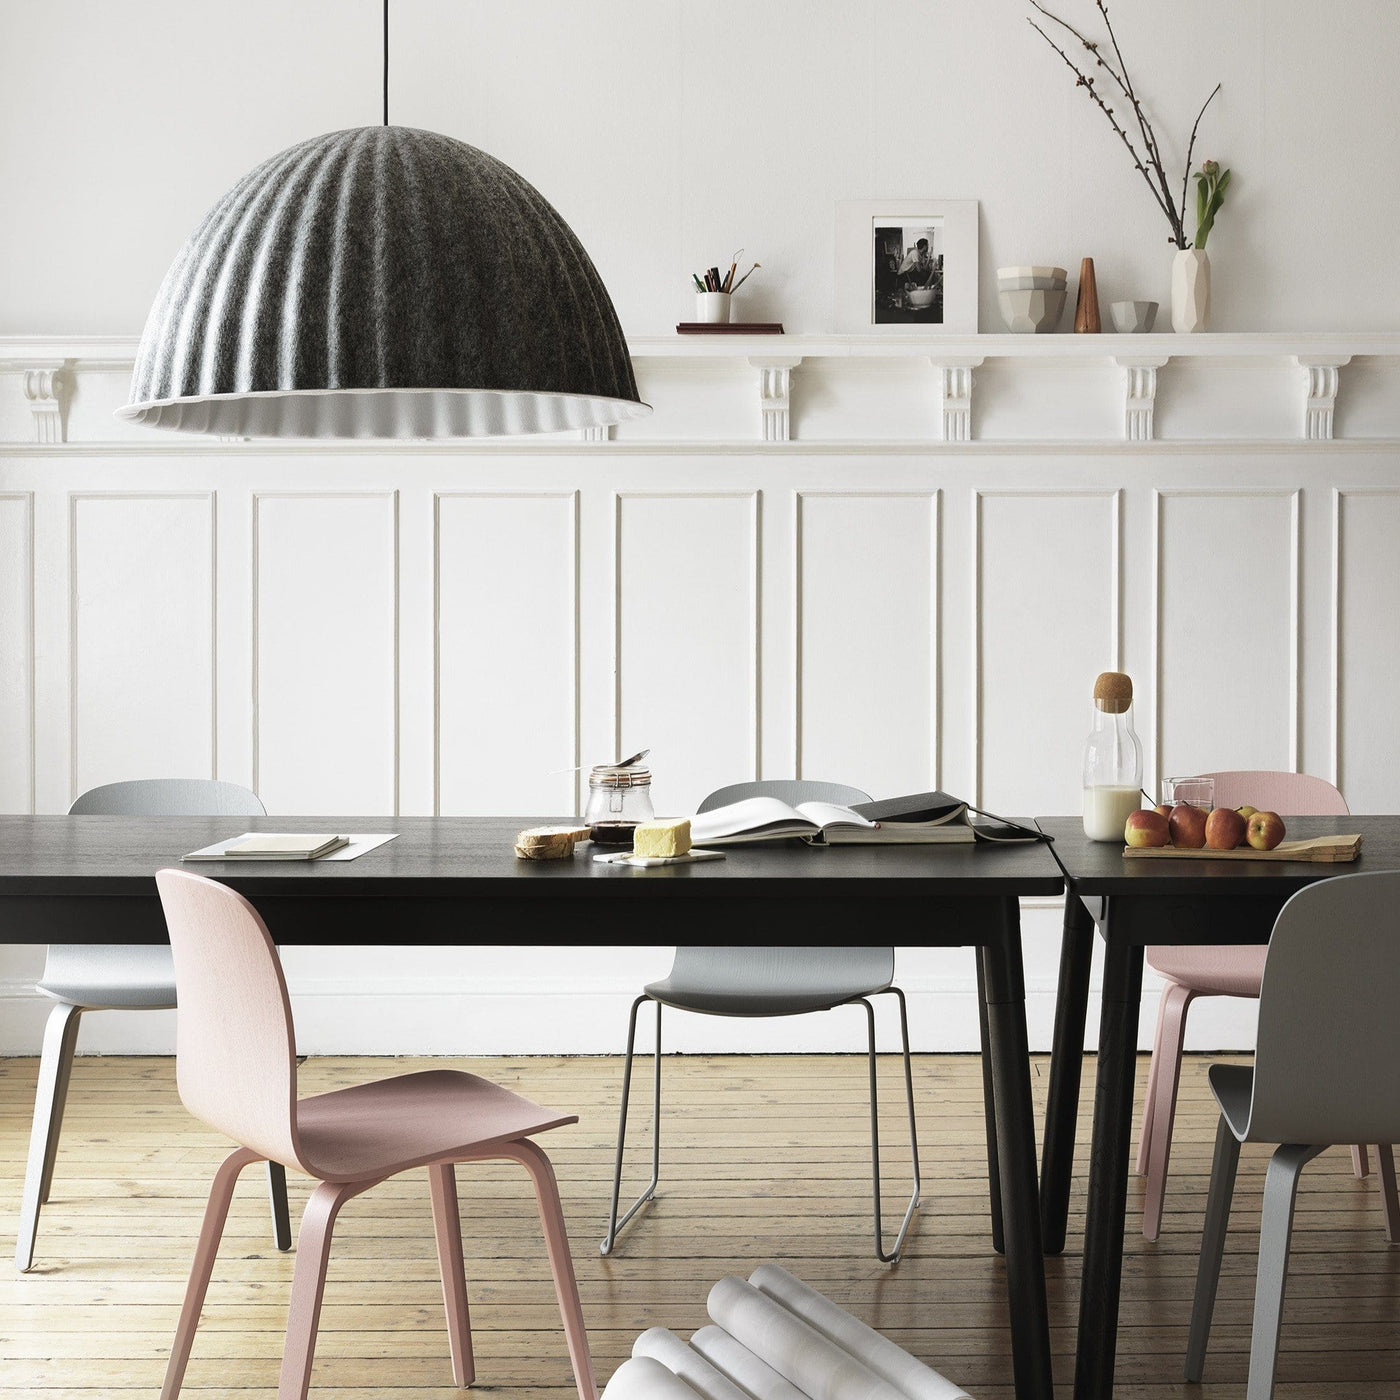 muuto under the bell pendant lamp grey large hung over dining table available at someday designs. #colour_grey-felt